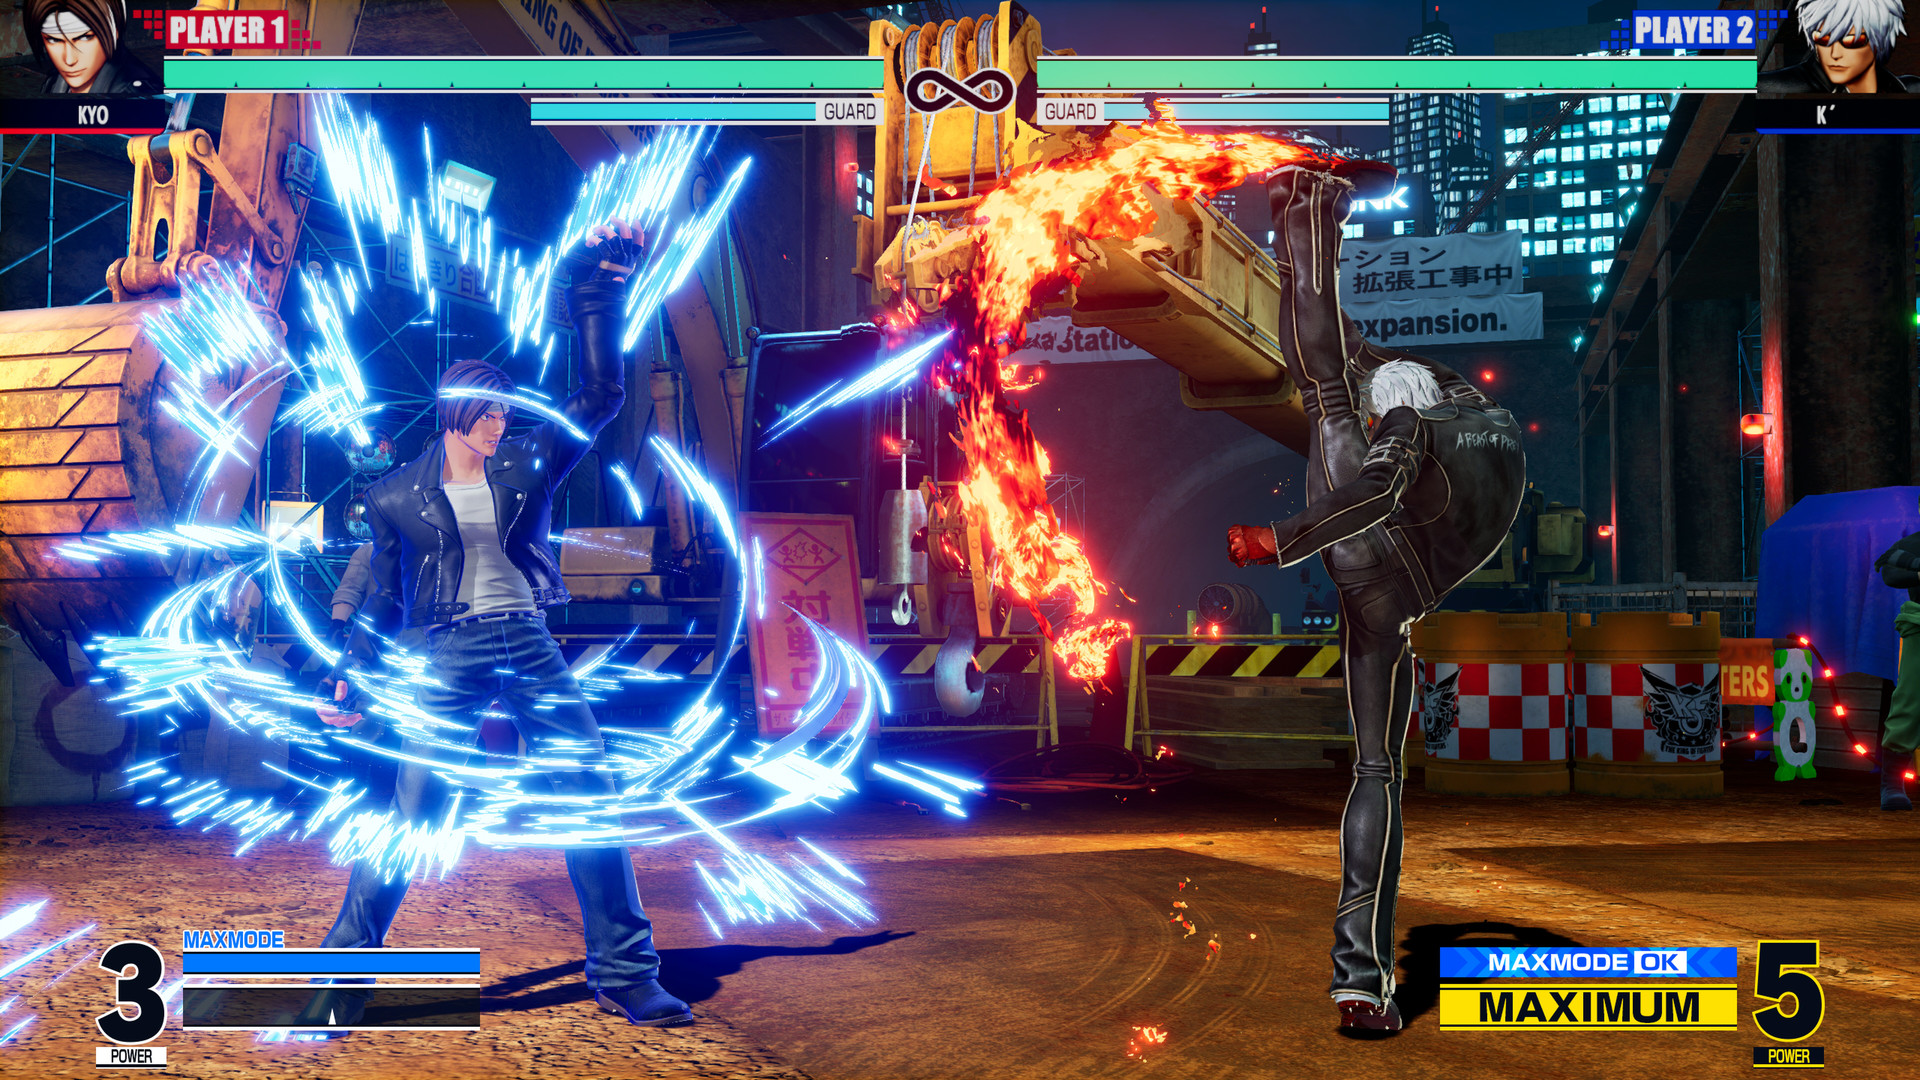 THE KING OF FIGHTERS XV Free Download